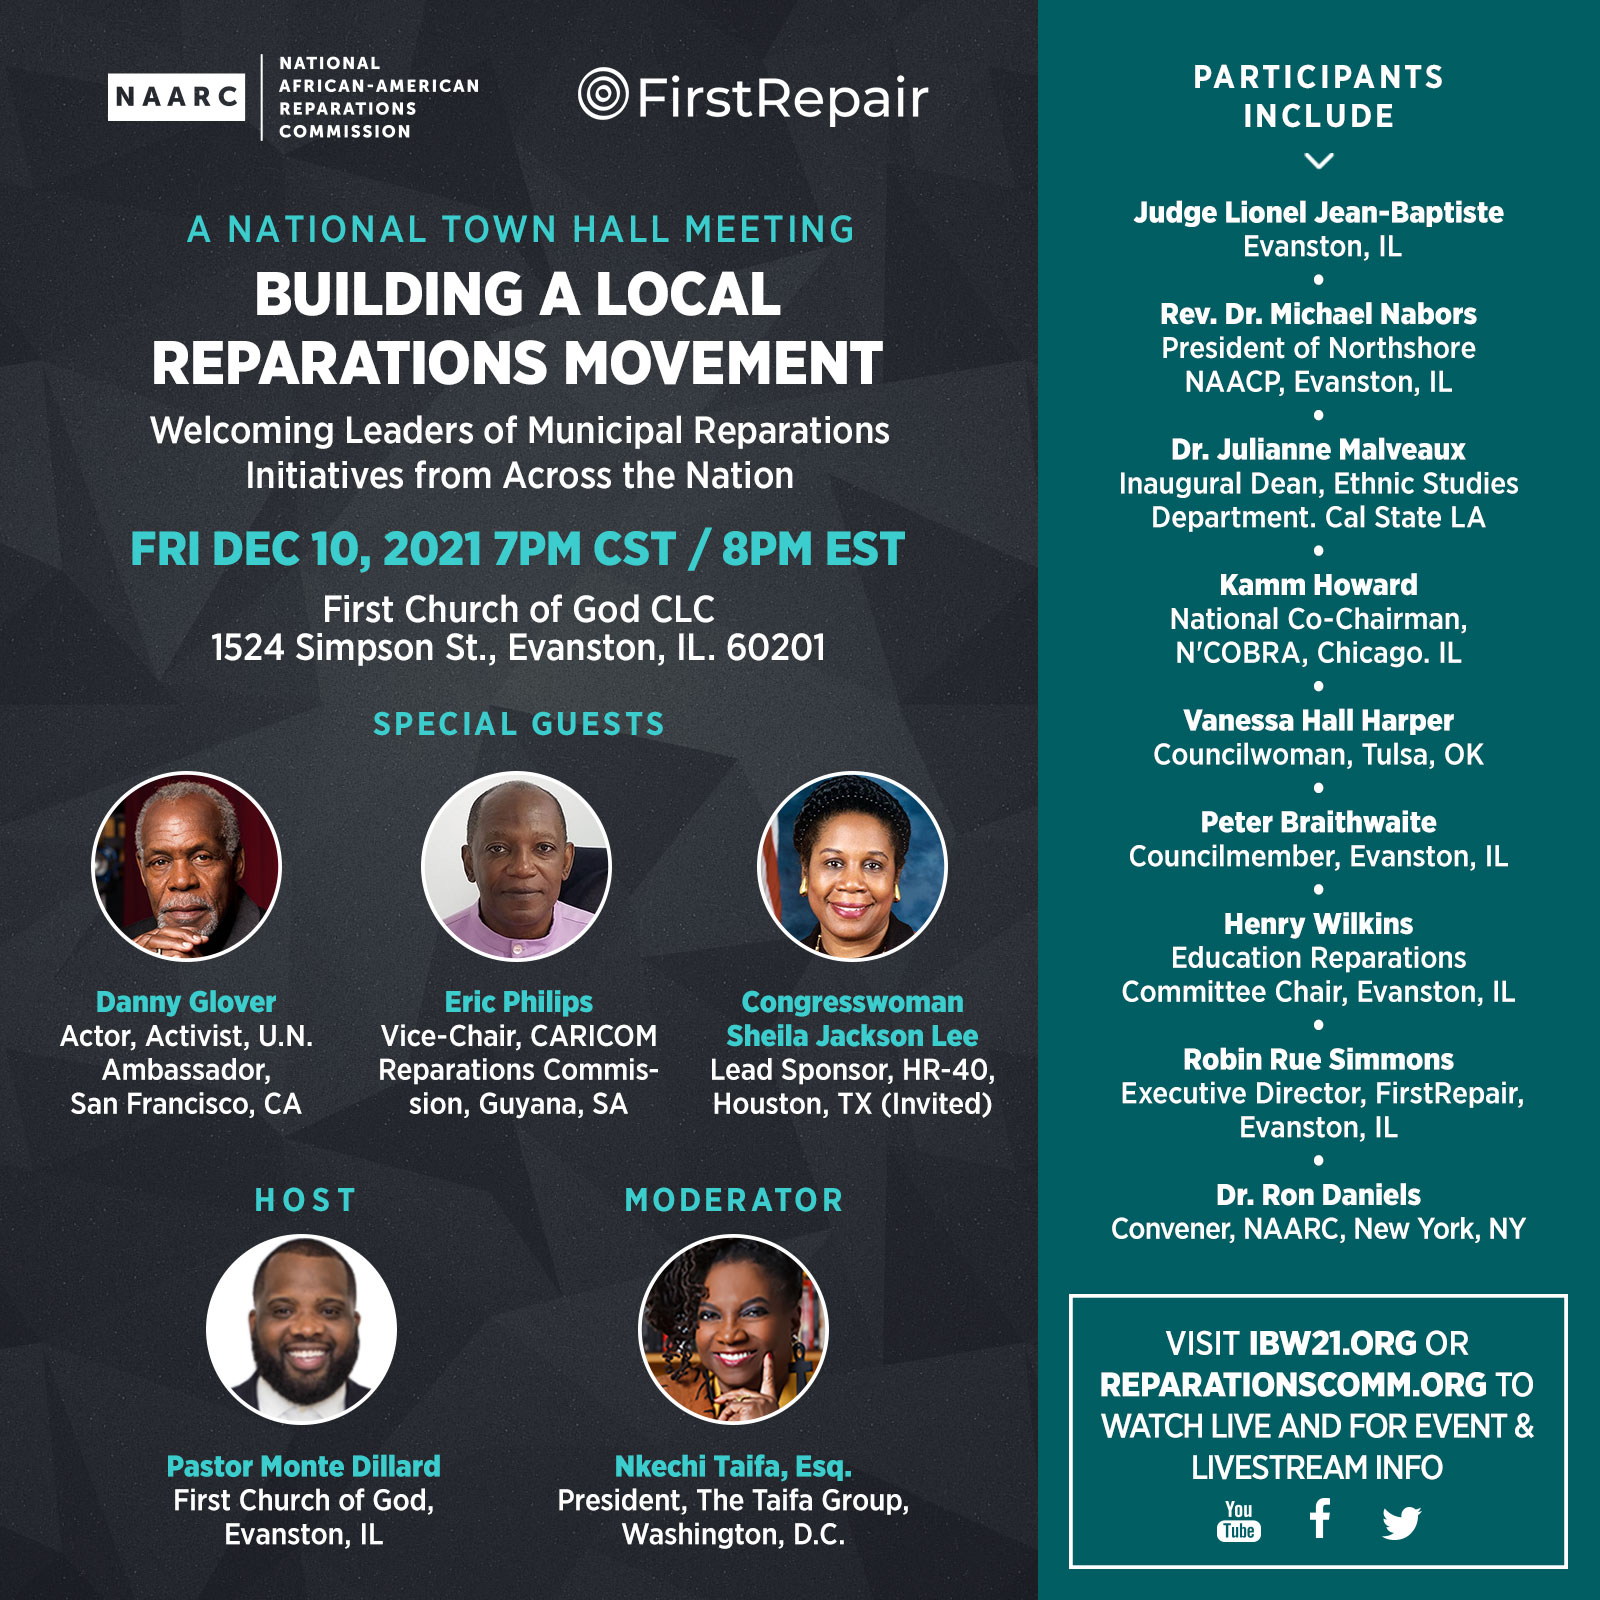 FRI DEC 10 2021 — A National town hall meeting, “Building a Local Reparations Movement” hosted in partnership with National African American Reparations Commission and FirstRepair. Leaders of municipal reparations initiatives from across the Nation are welcomed.